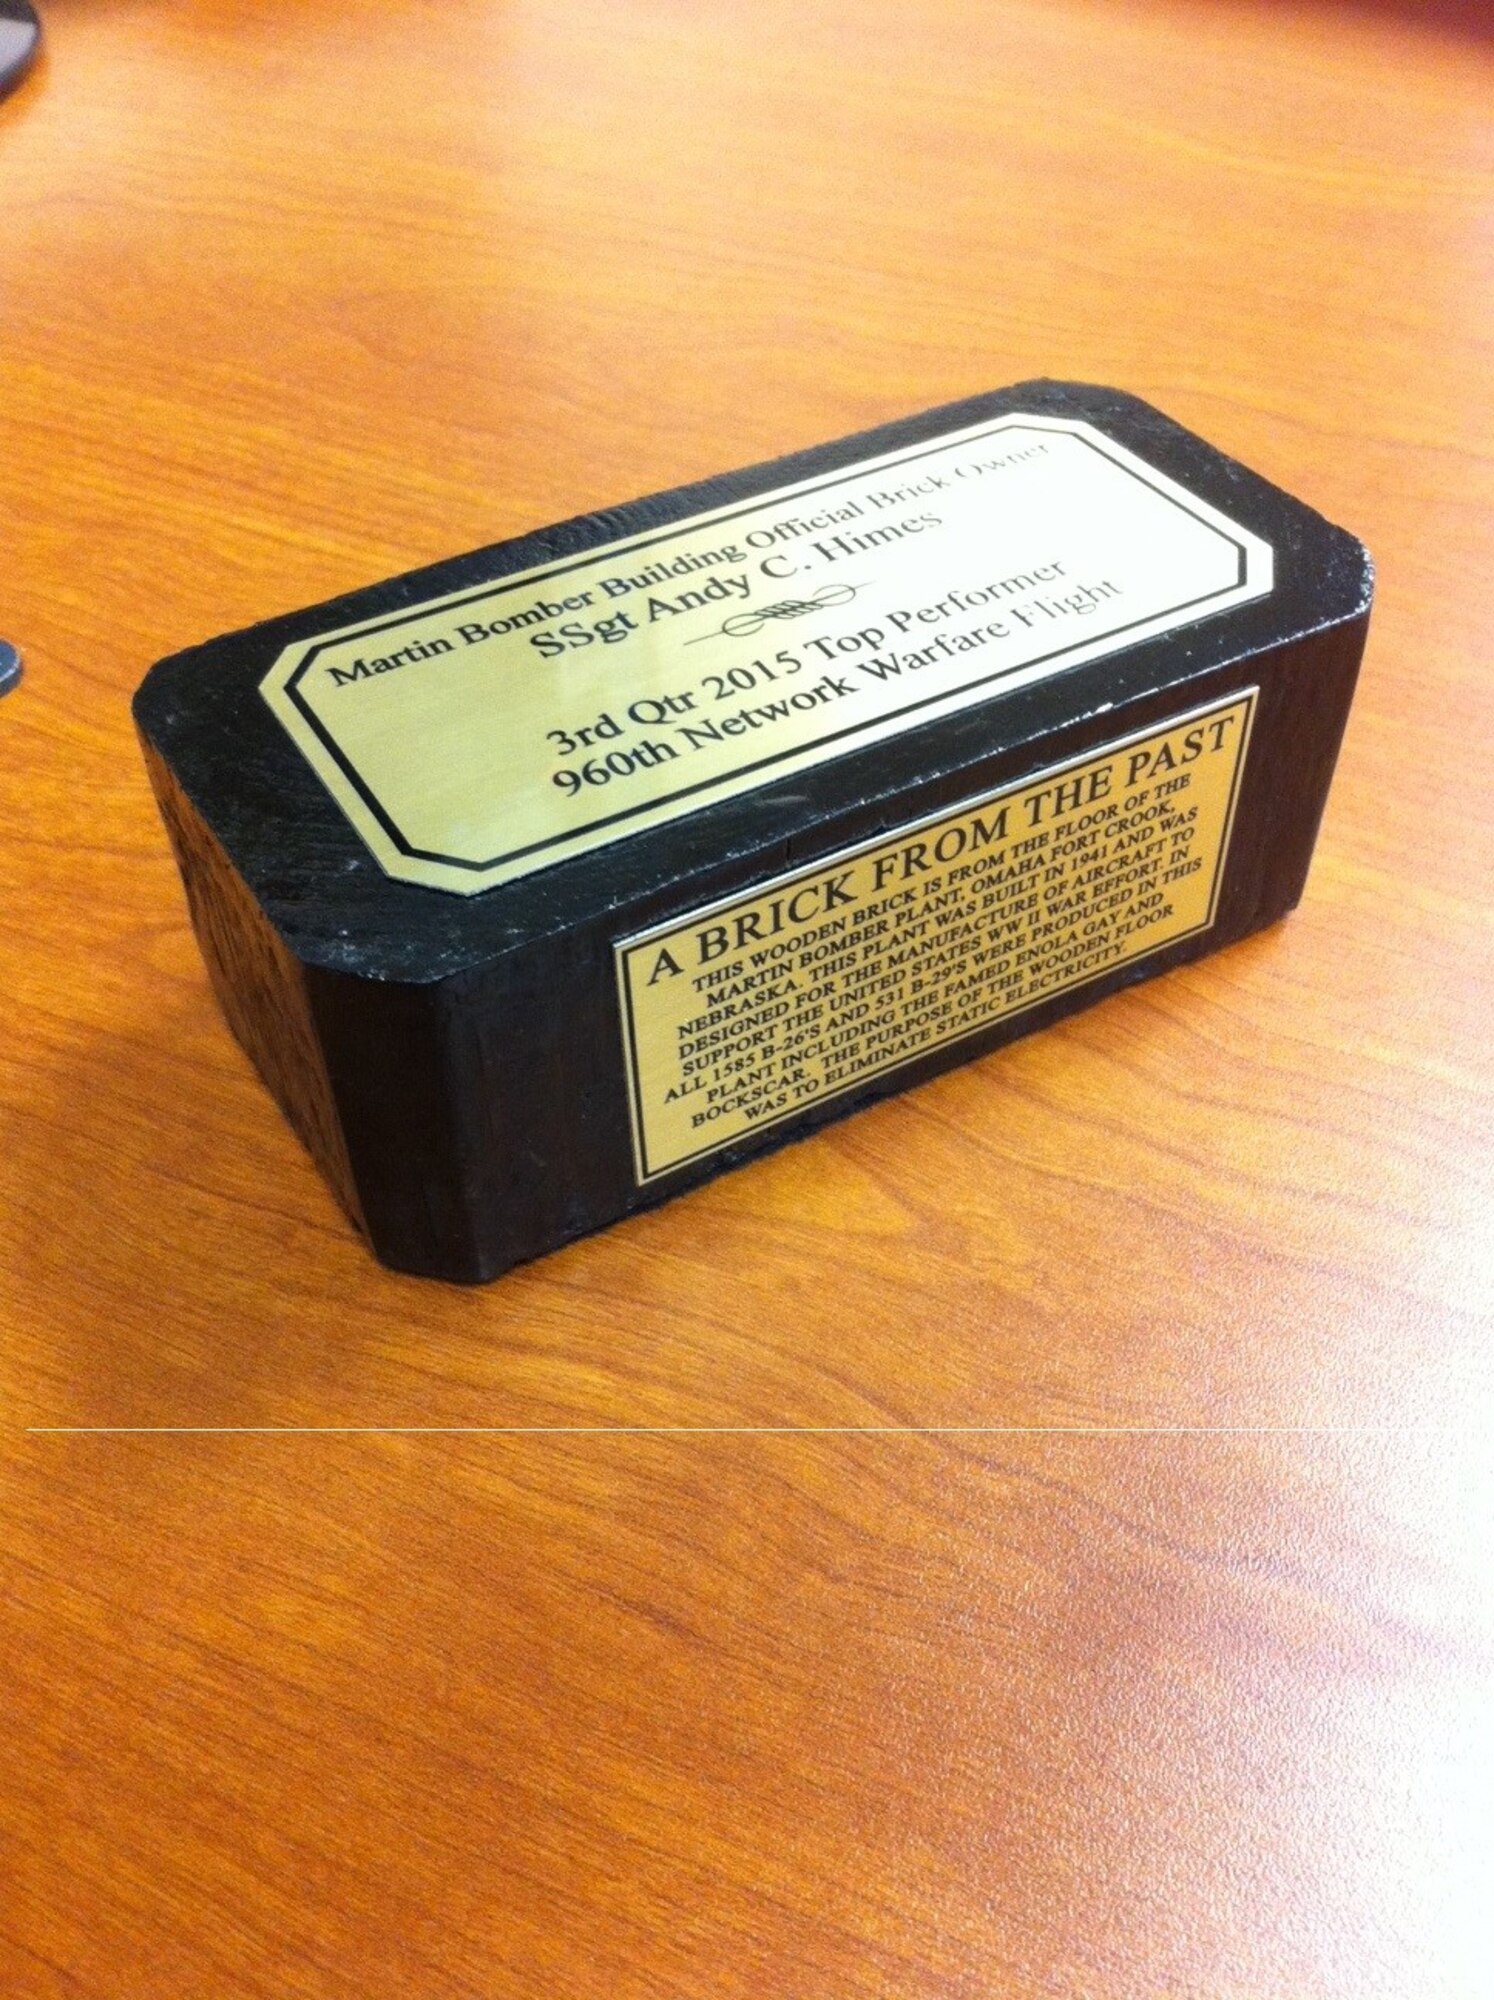 For quarterly awards, Outstanding Airman are awarded wooden bricks from the floor of the original Glen L. Martin Nebraska Bomber Plant that produced the Enola Gay and Bock’s Car. (Courtesy photo)  
